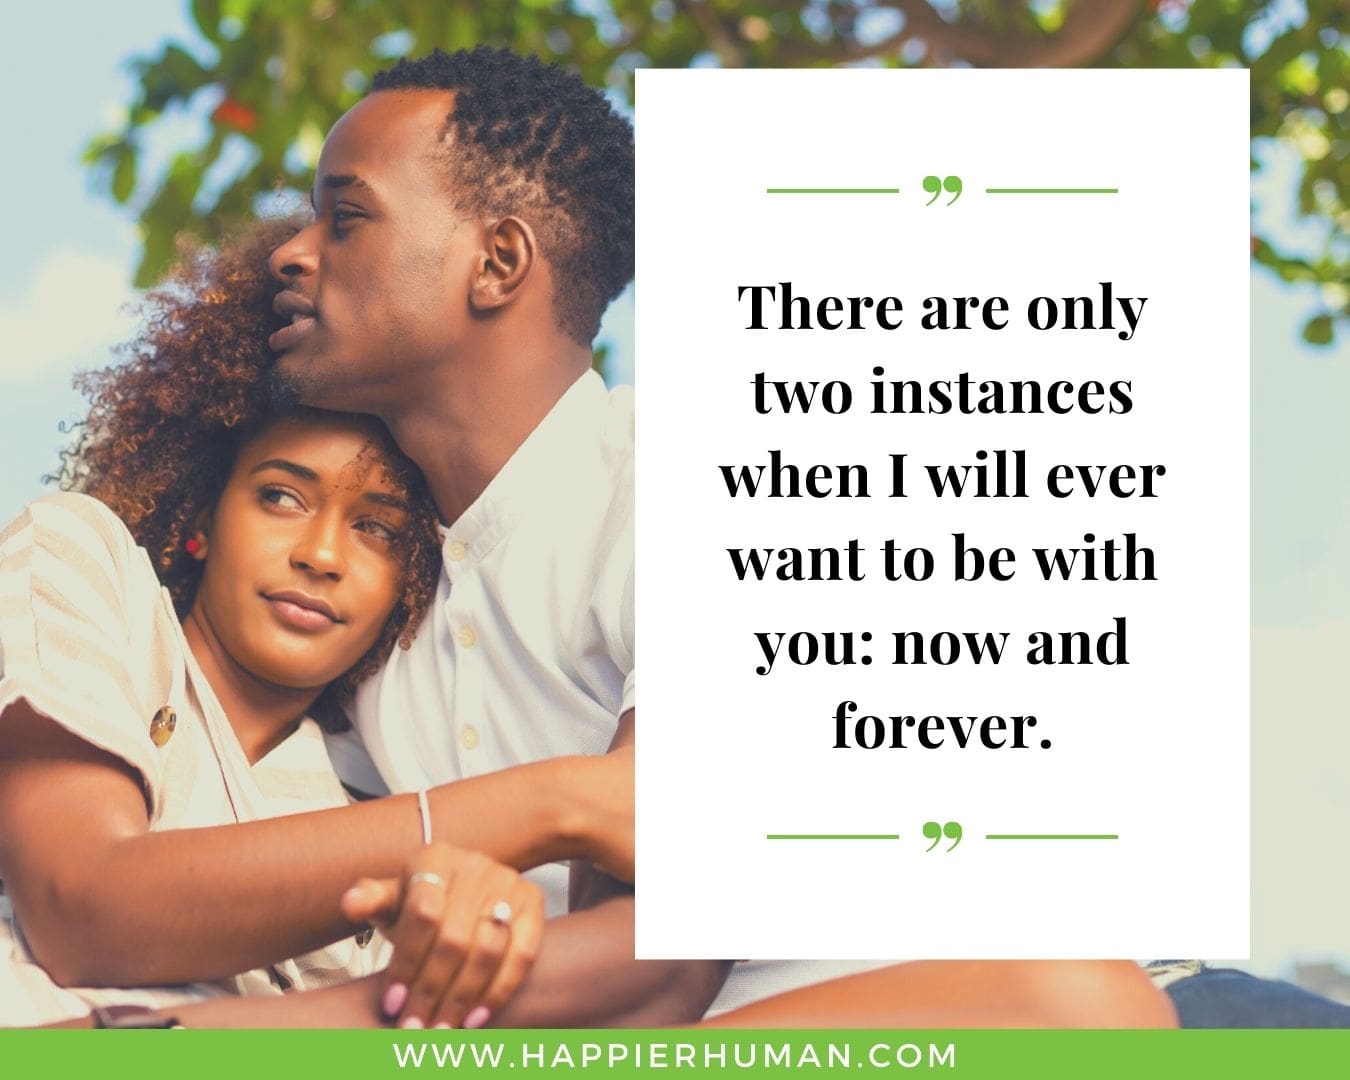 Romance Quotes to Inspire Your Relationship “There are only two instances when I will ever want to be with you: now and forever.”